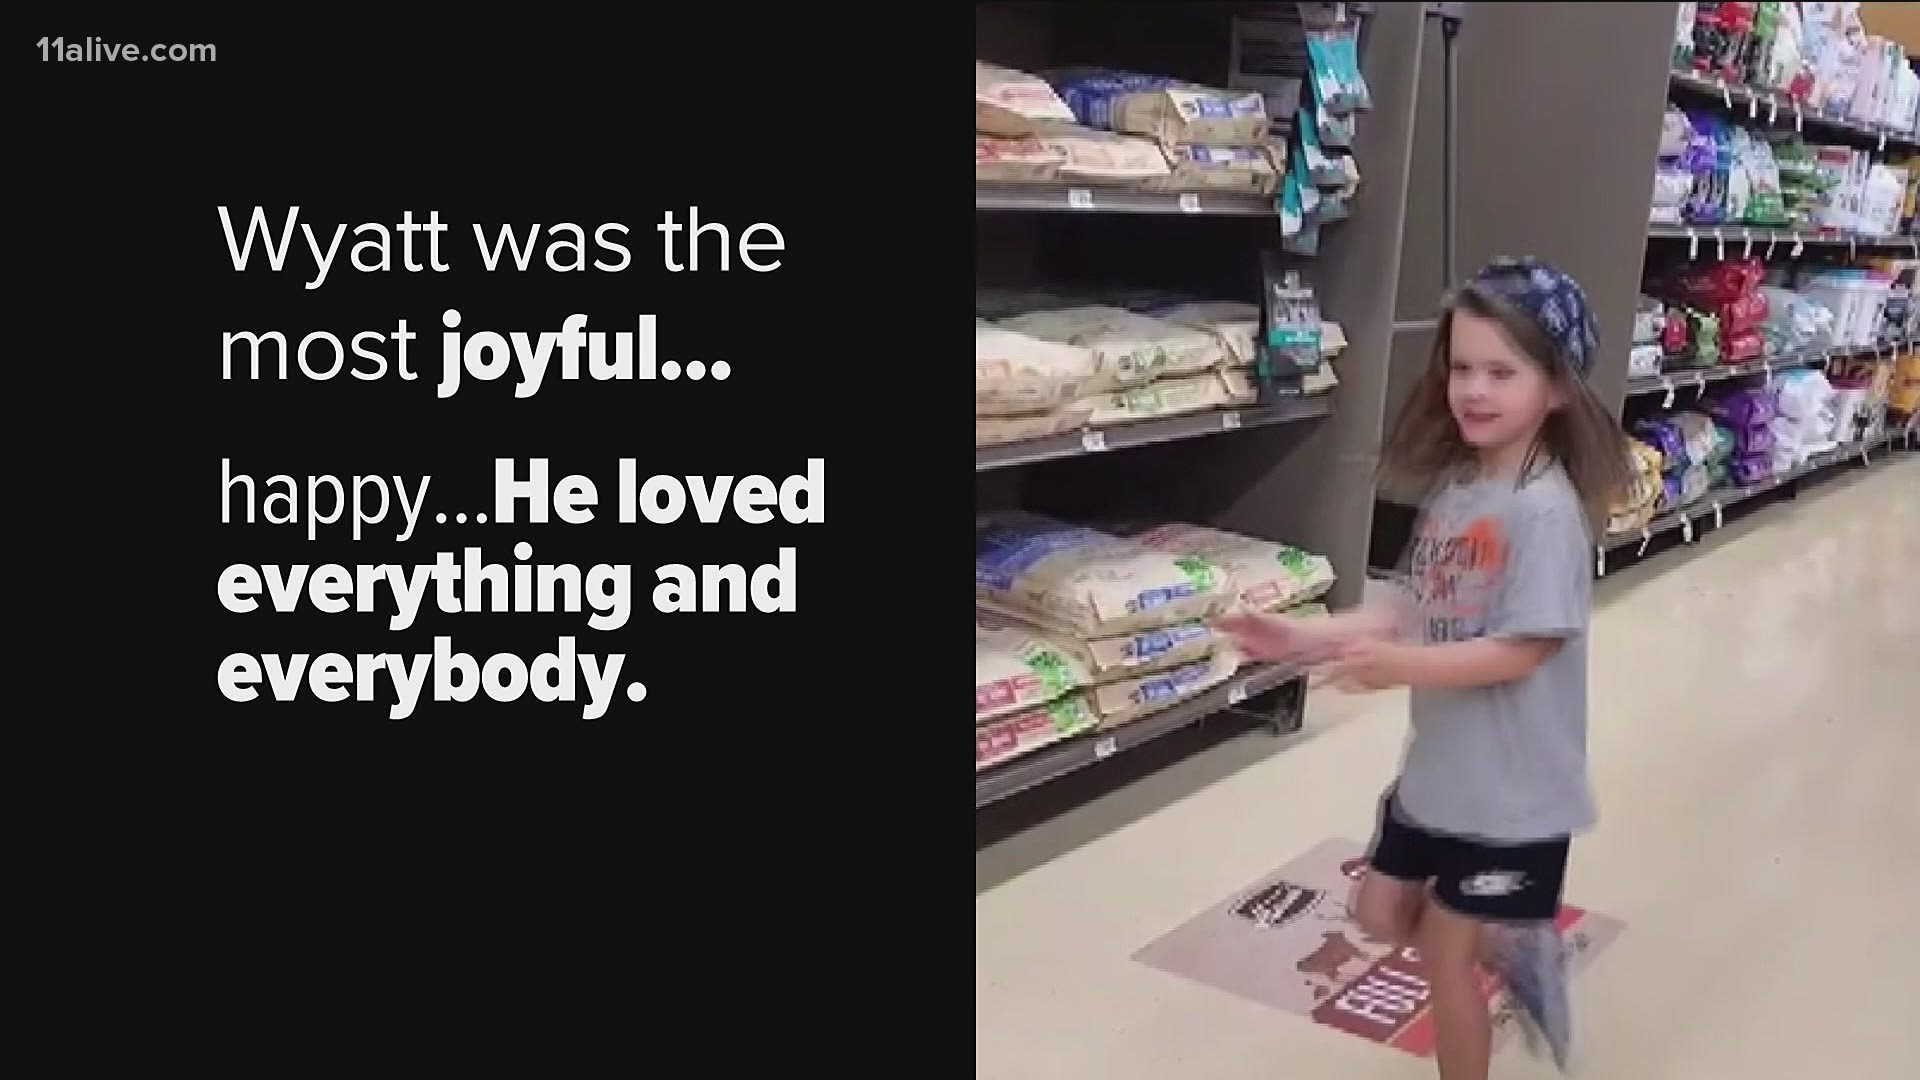 The godmother of 5-year-old Wyatt is sharing his story, so people can remember the joyful, friendly boy he was.